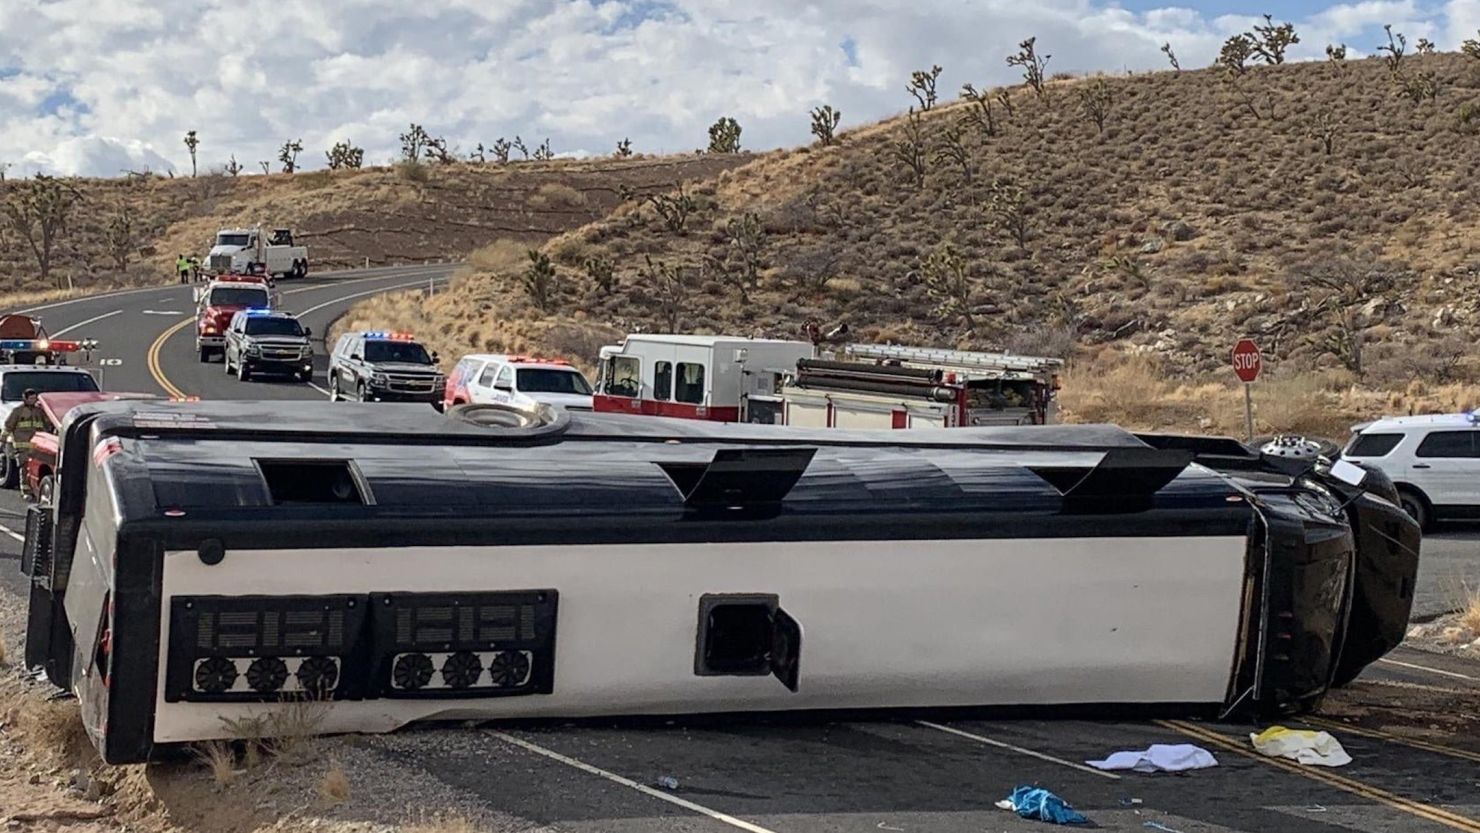 The bus was carrying 48 people including the driver, according to the Mohave County Sheriff's Office.